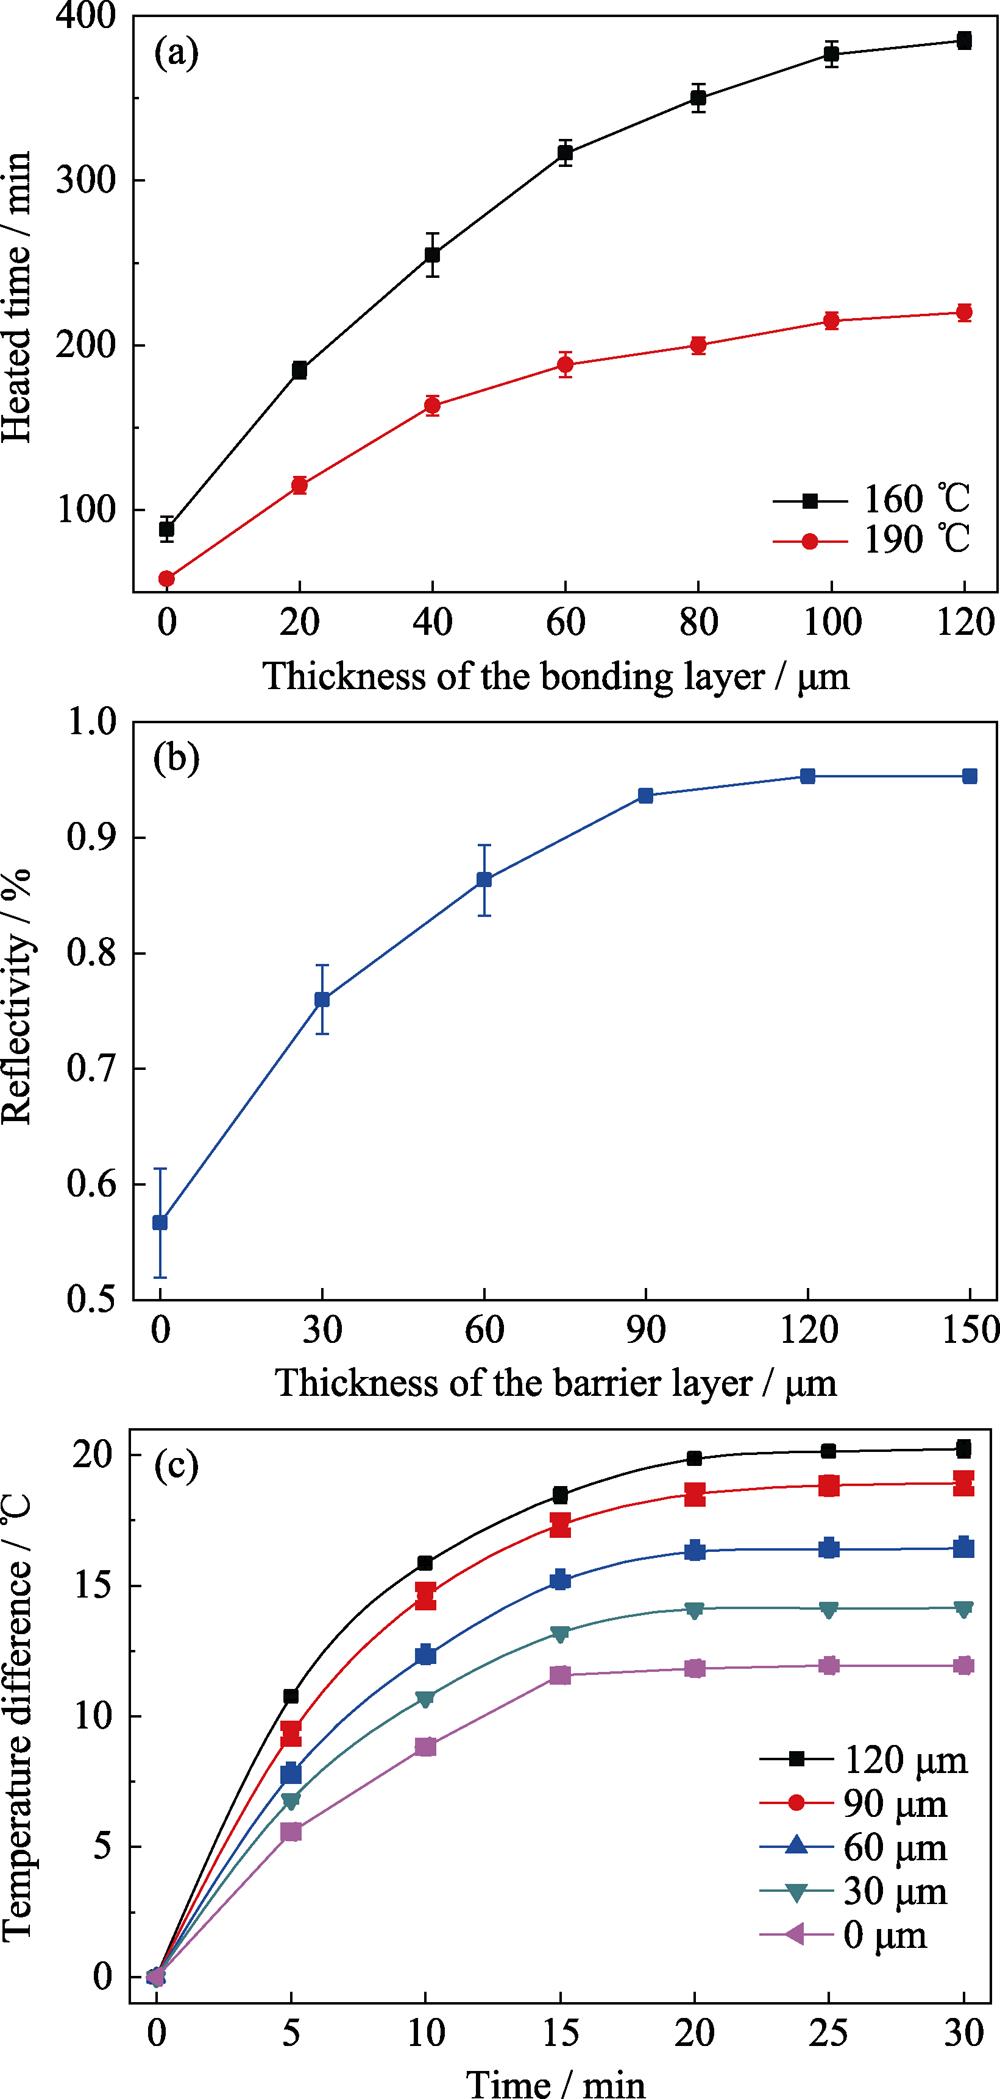 Thickness optimization of the designed functional layers(a) Time required for coating to fall off at 160 and 190 ℃; (b) Reflectivity of coatings with different thicknesses of reflective layers; (c) Temperature difference change curves for coatings with different thicknesses of the barrier layer